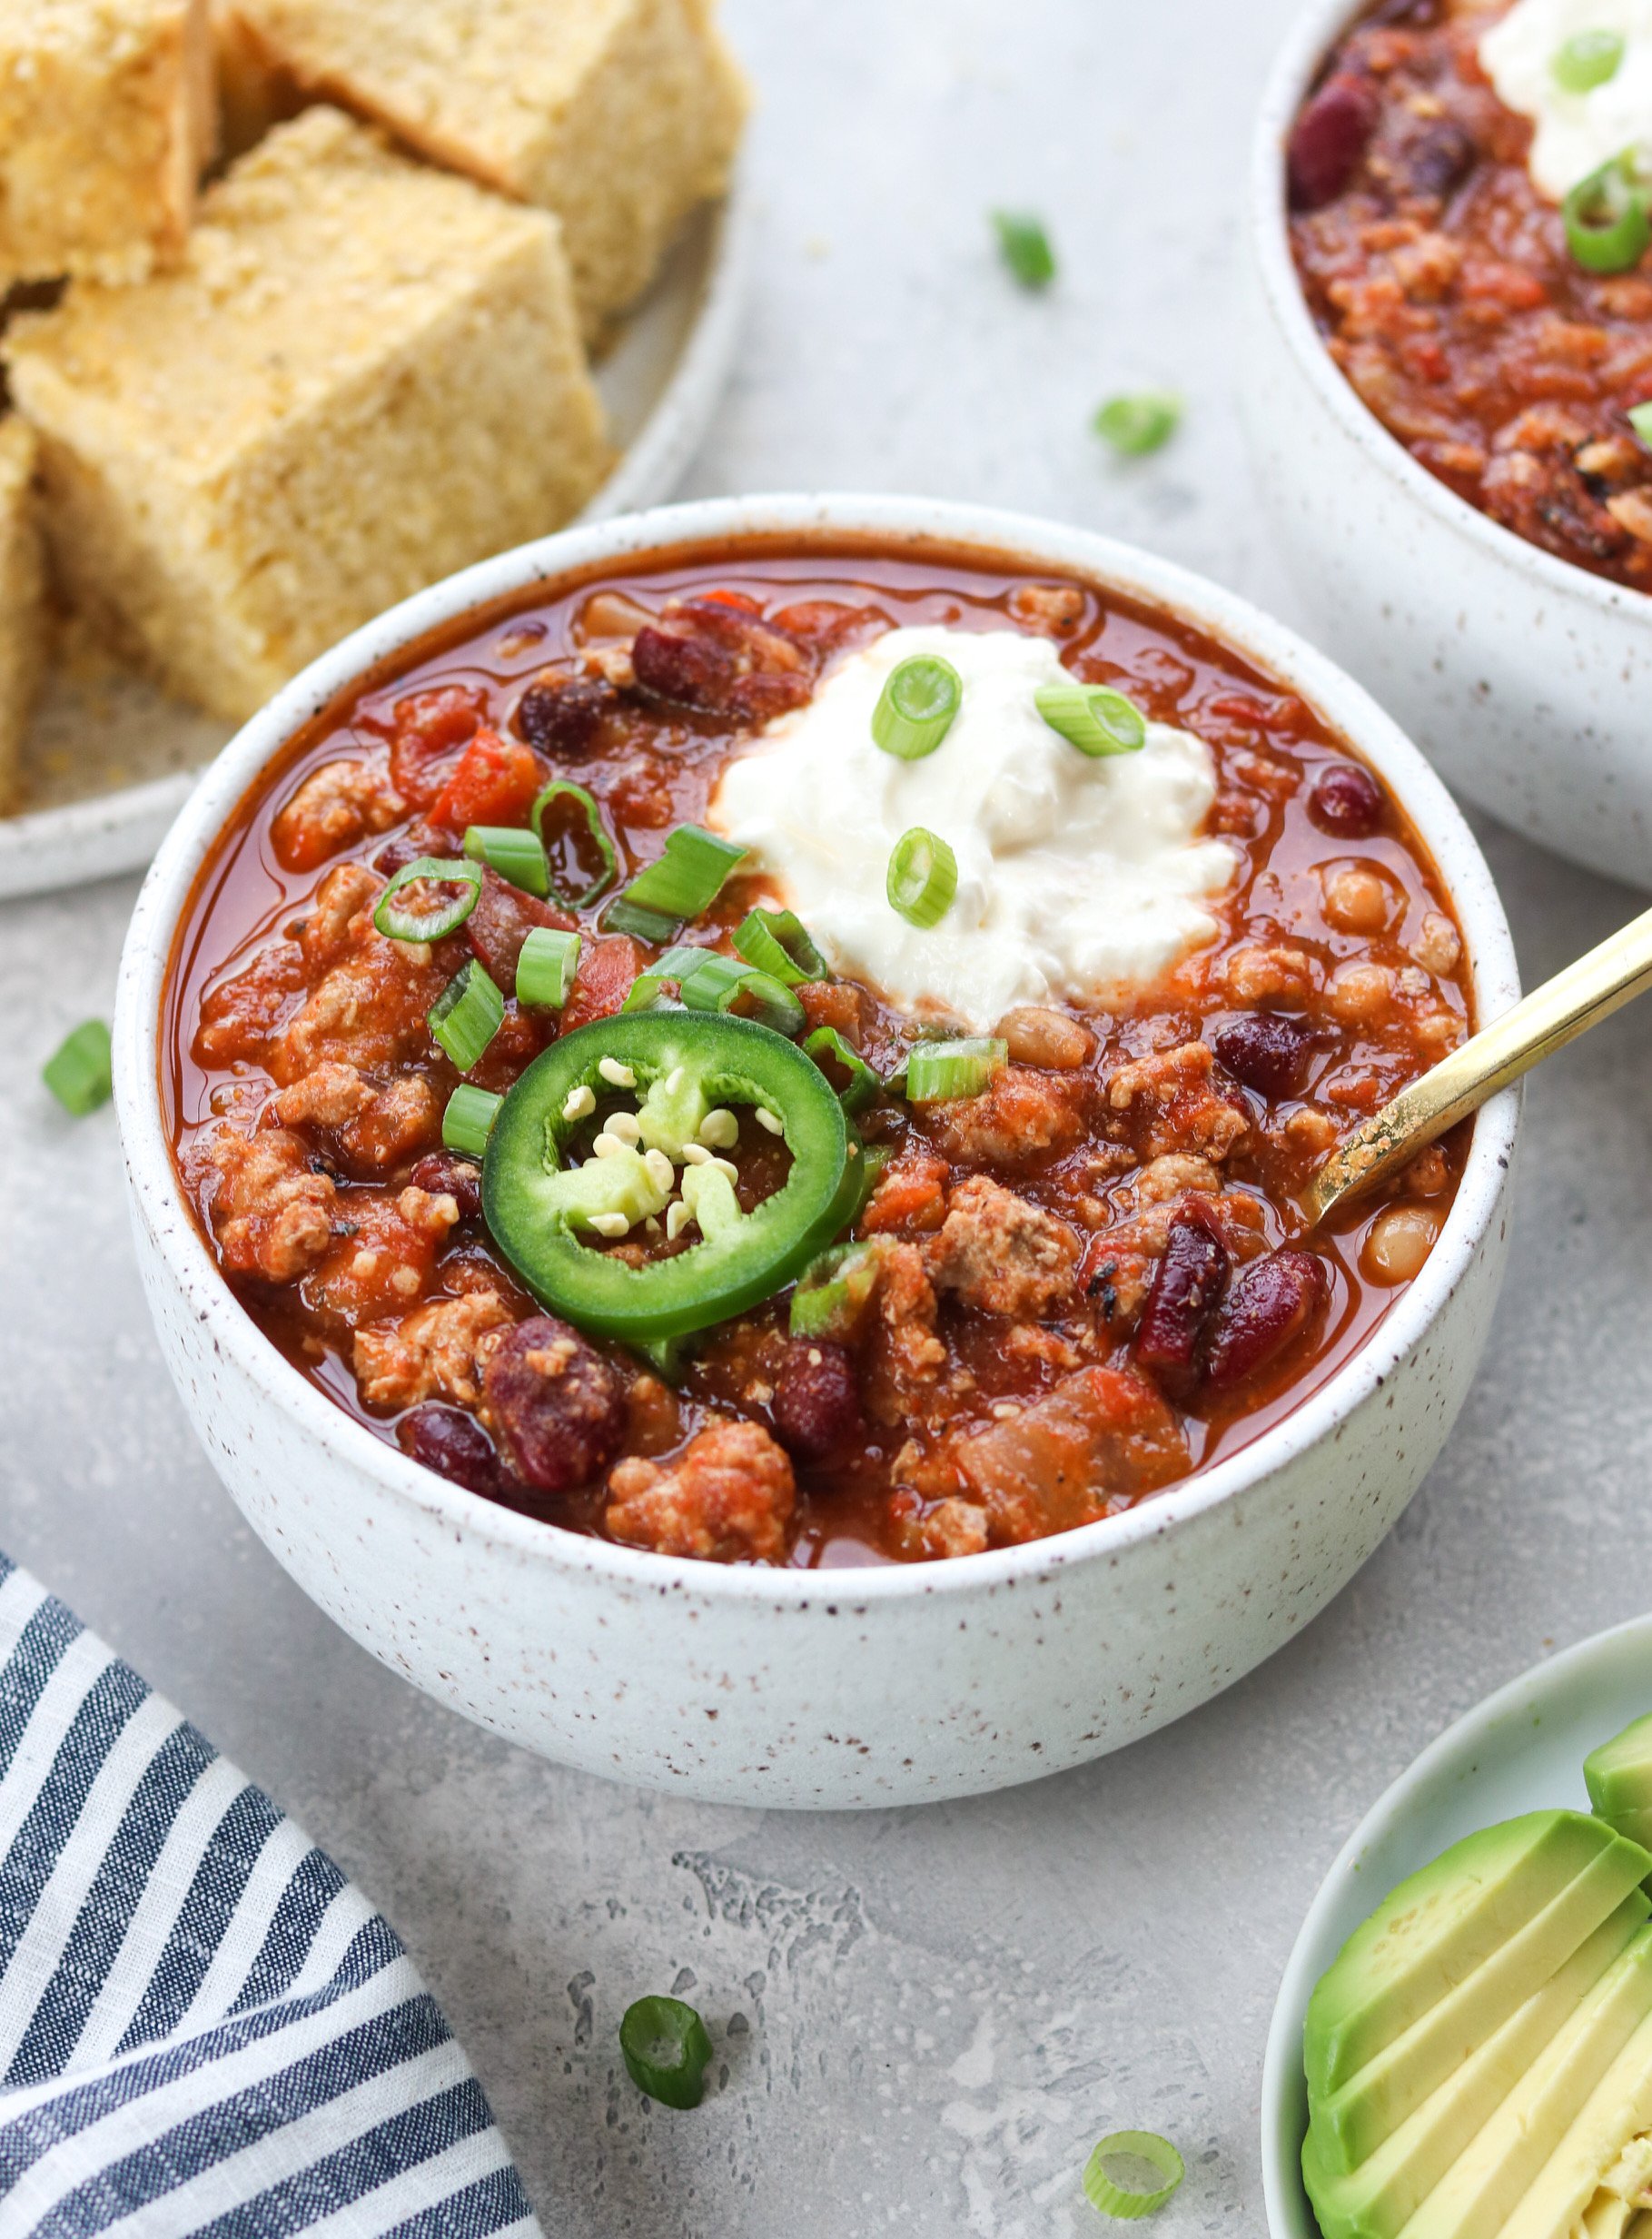 Slow cooker turkey chili with sour cream and jalapeño